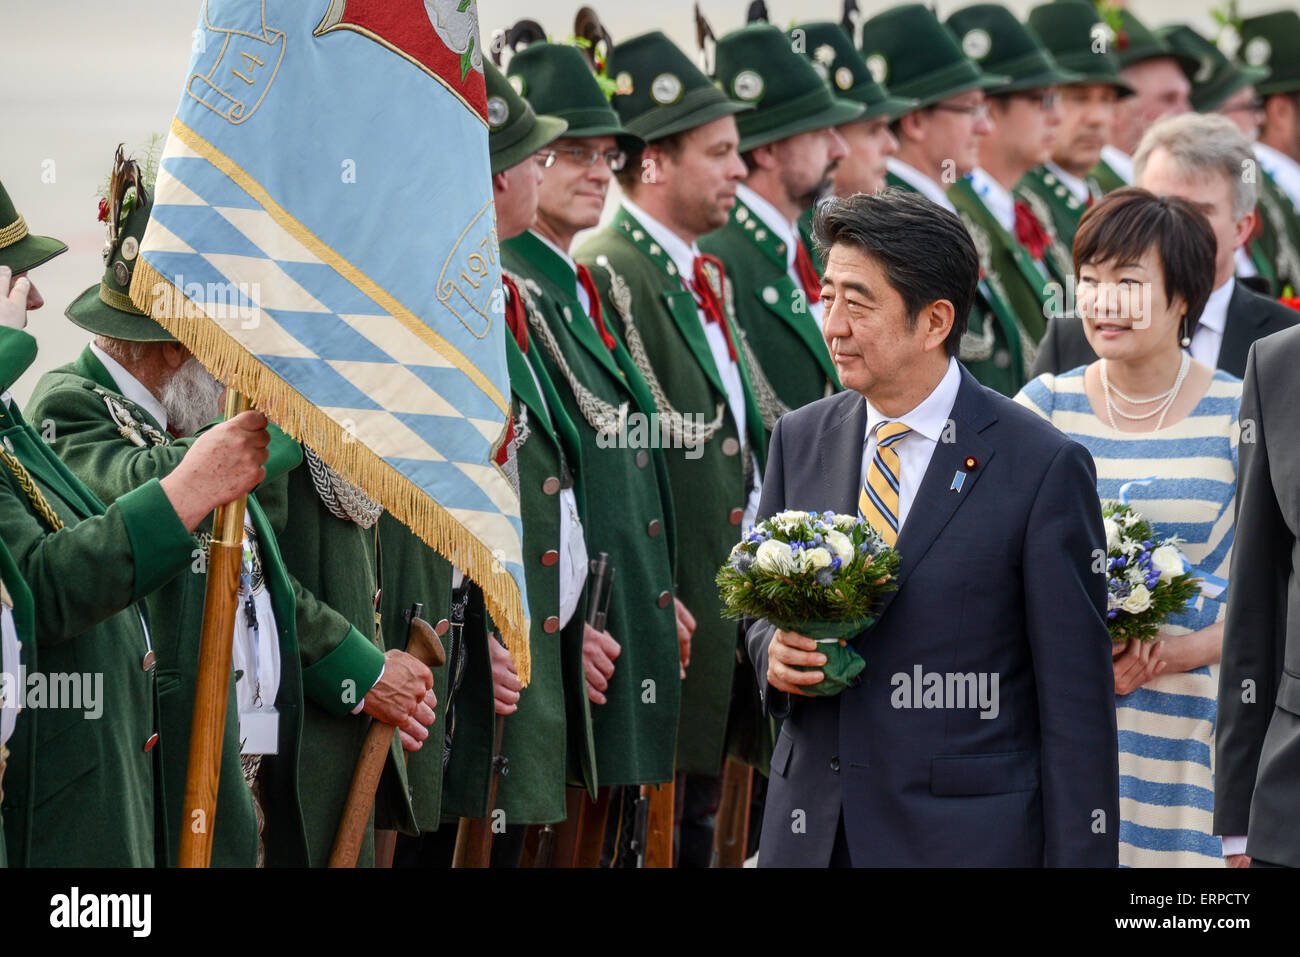 Munich, Germany. 06th June, 2015. Japan's Prime Minister Shinzo Abe and his wife Akie are welcomed by Bavarian marksmen at the airport in Munich, Germany, 06 June 2015. Heads of state and government of the seven leading industrialized nations (G7) are scheduled to meet in Elmau Castle, Bavaria, on 07 and 08 June as the climax of Germany's presidency of the G7. Photo: ARMIN WEIGEL/dpa/Alamy Live News Stock Photo